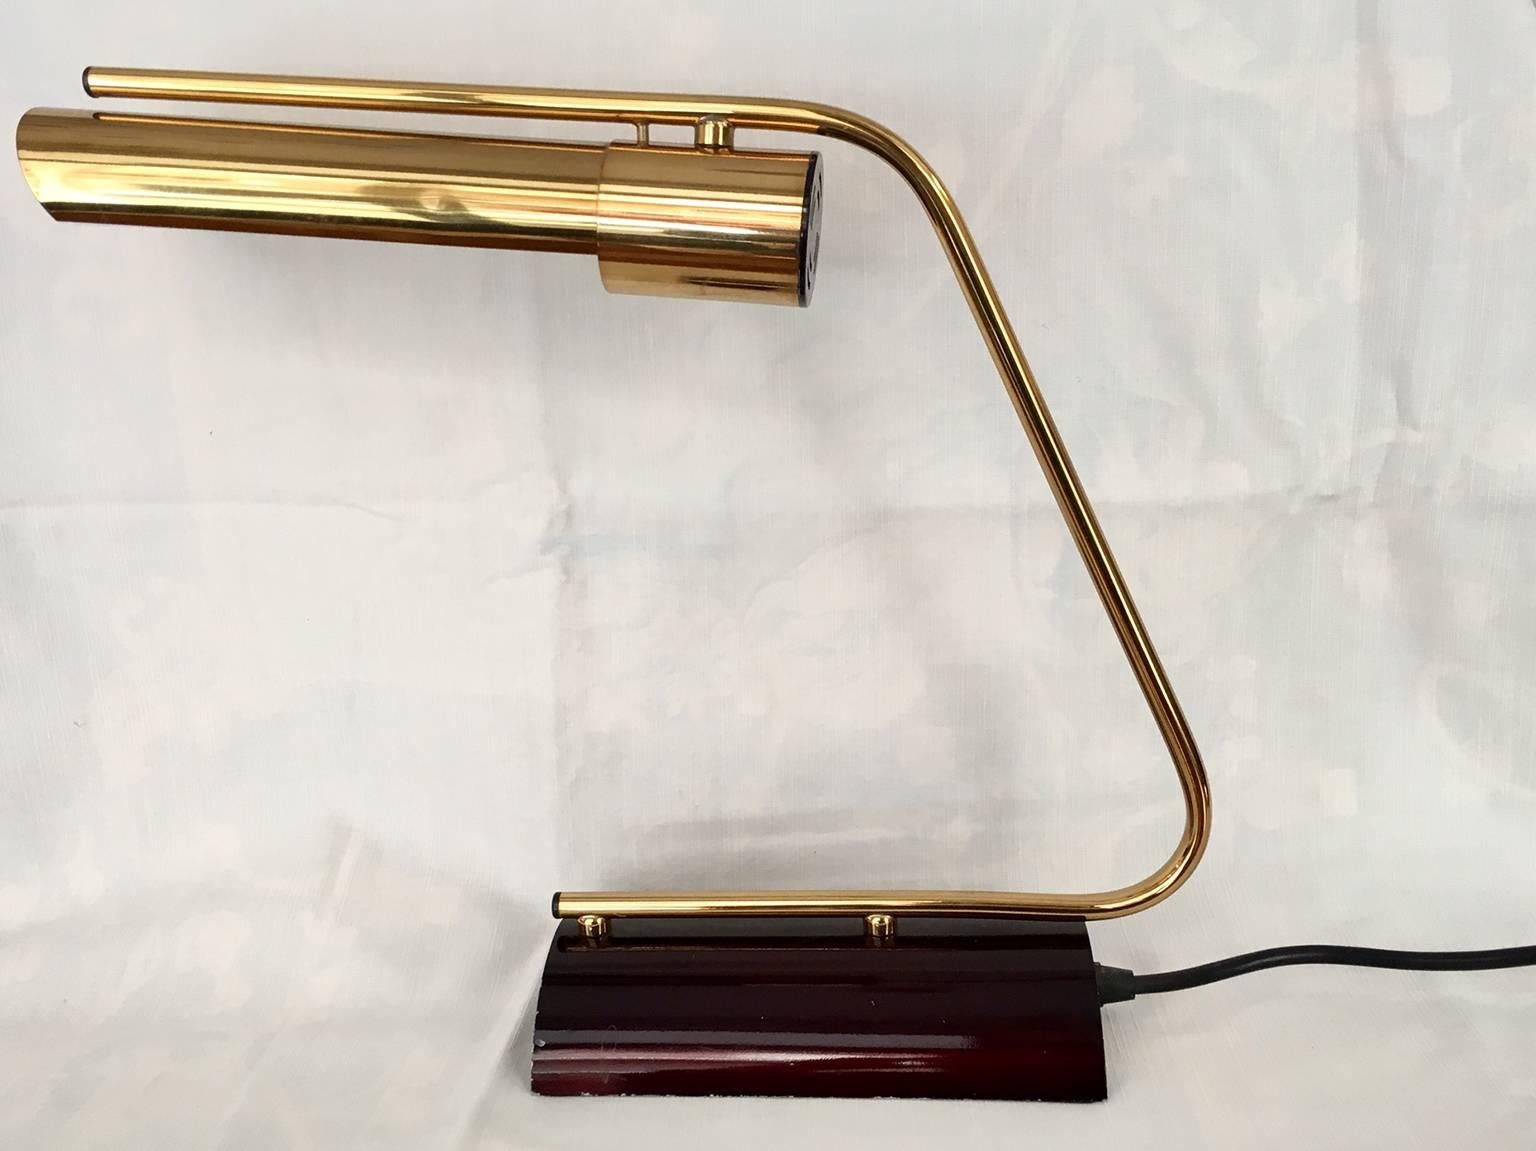 Pair of rare Philips desk-lamps made of gold brass with a lacquered brass base in maroon.